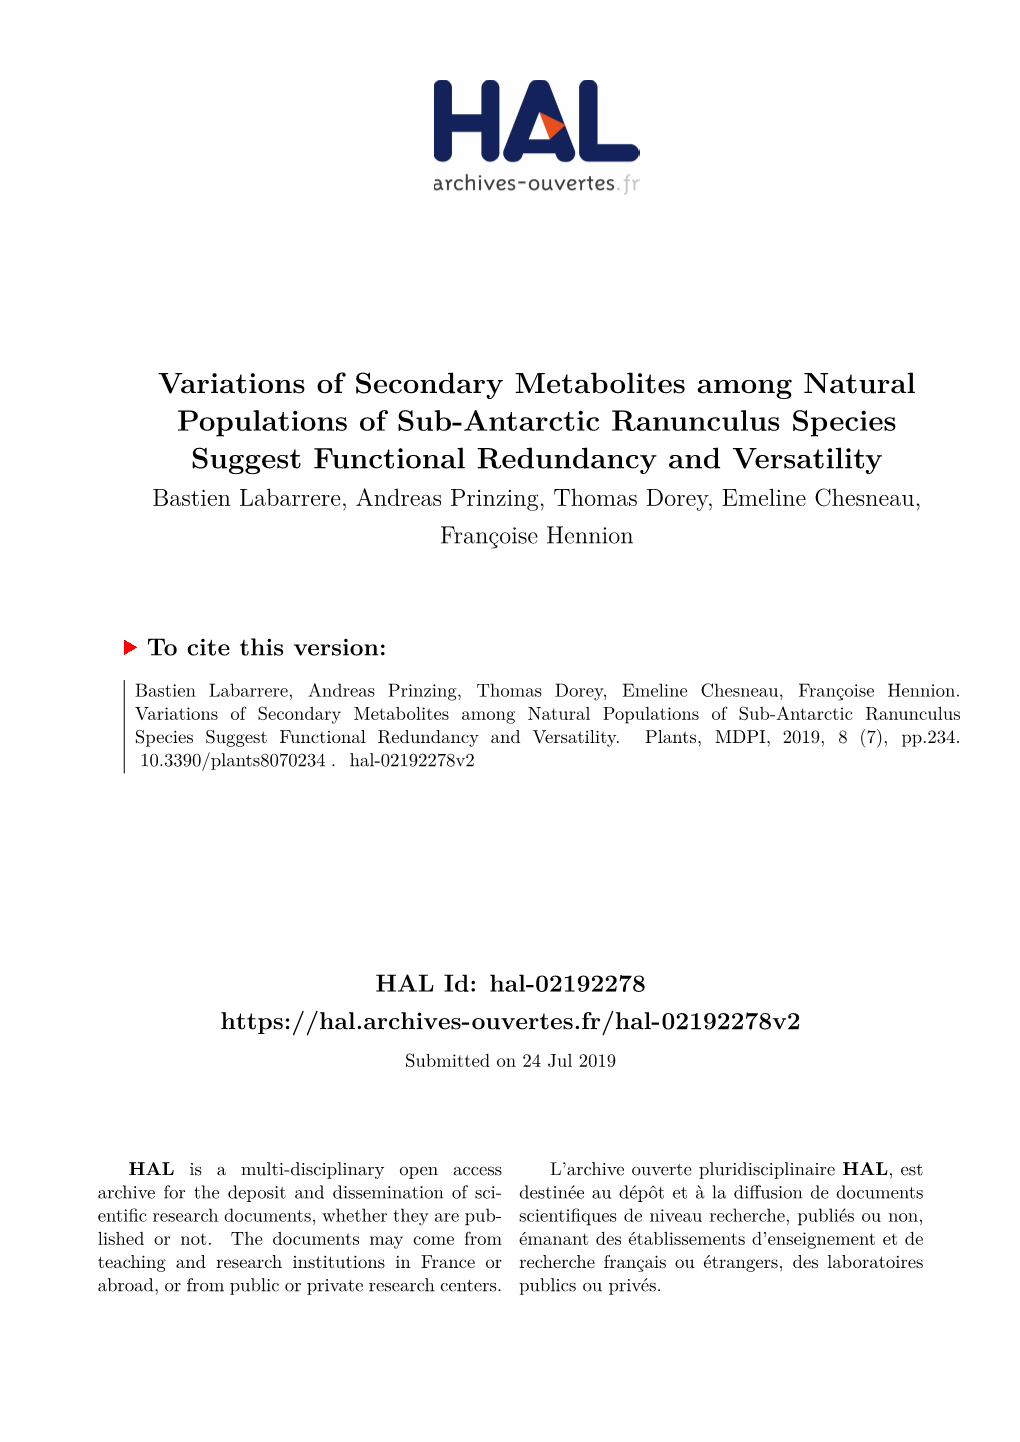 Variations of Secondary Metabolites Among Natural Populations of Sub